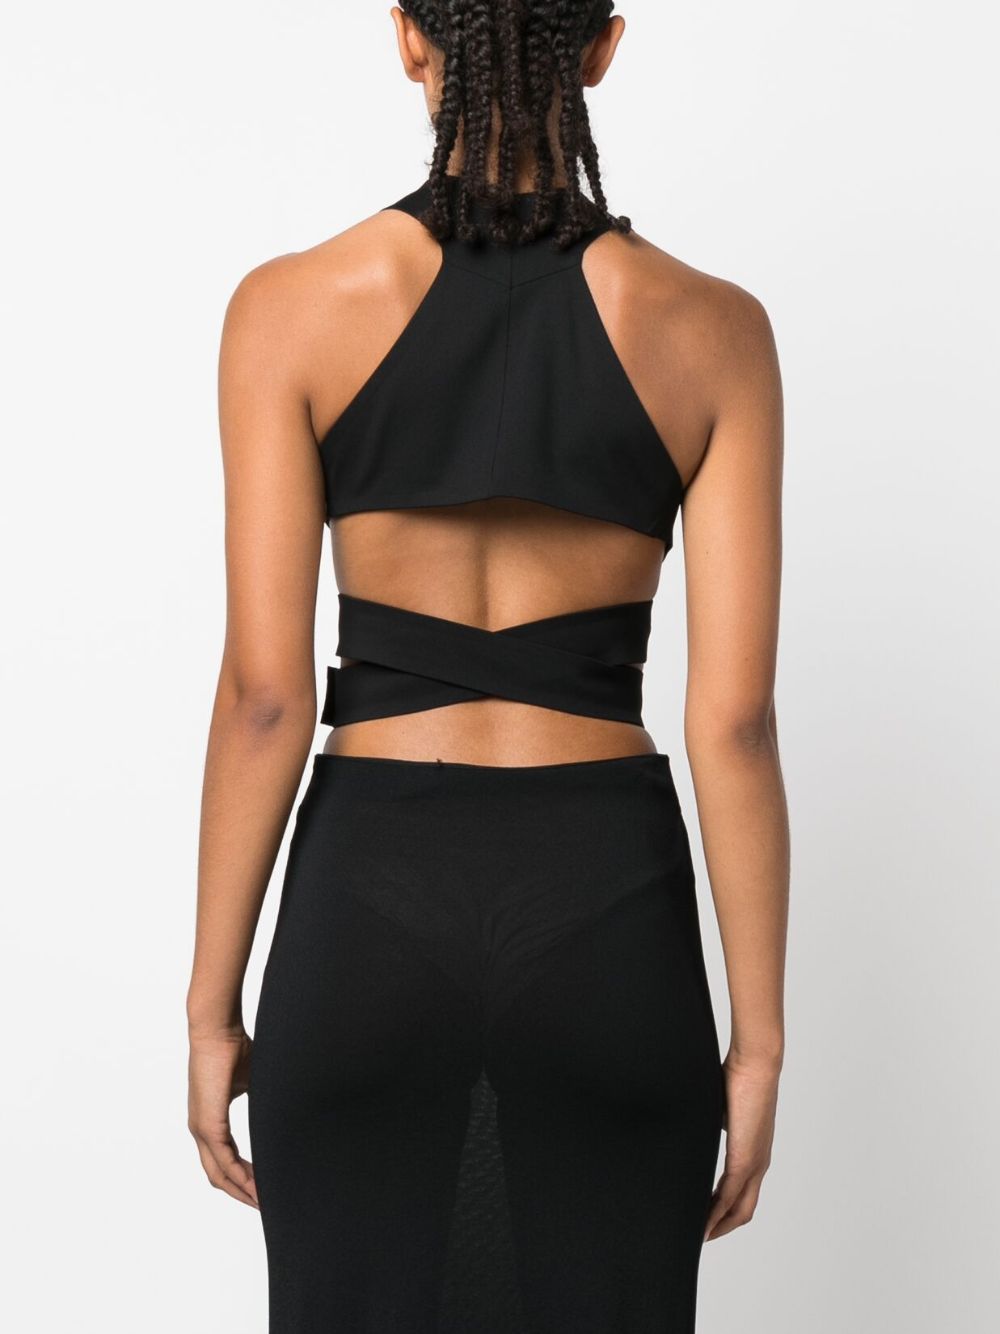 Crossover Sleeveless Crop Top from ALAIA Pre-Owned - Women's Black Top for FW23